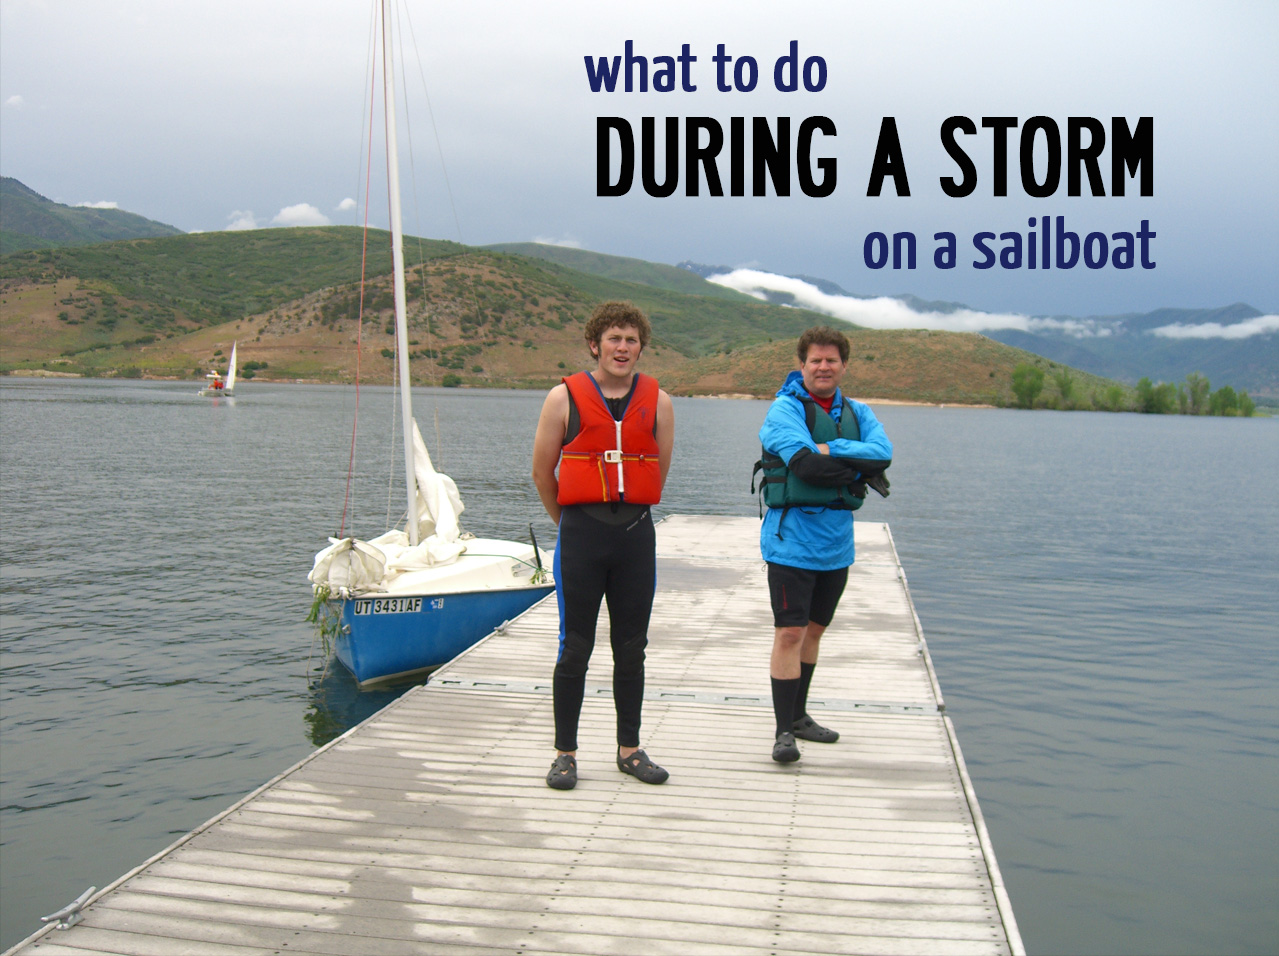 Seven tips on what to do during a storm on a sailboat